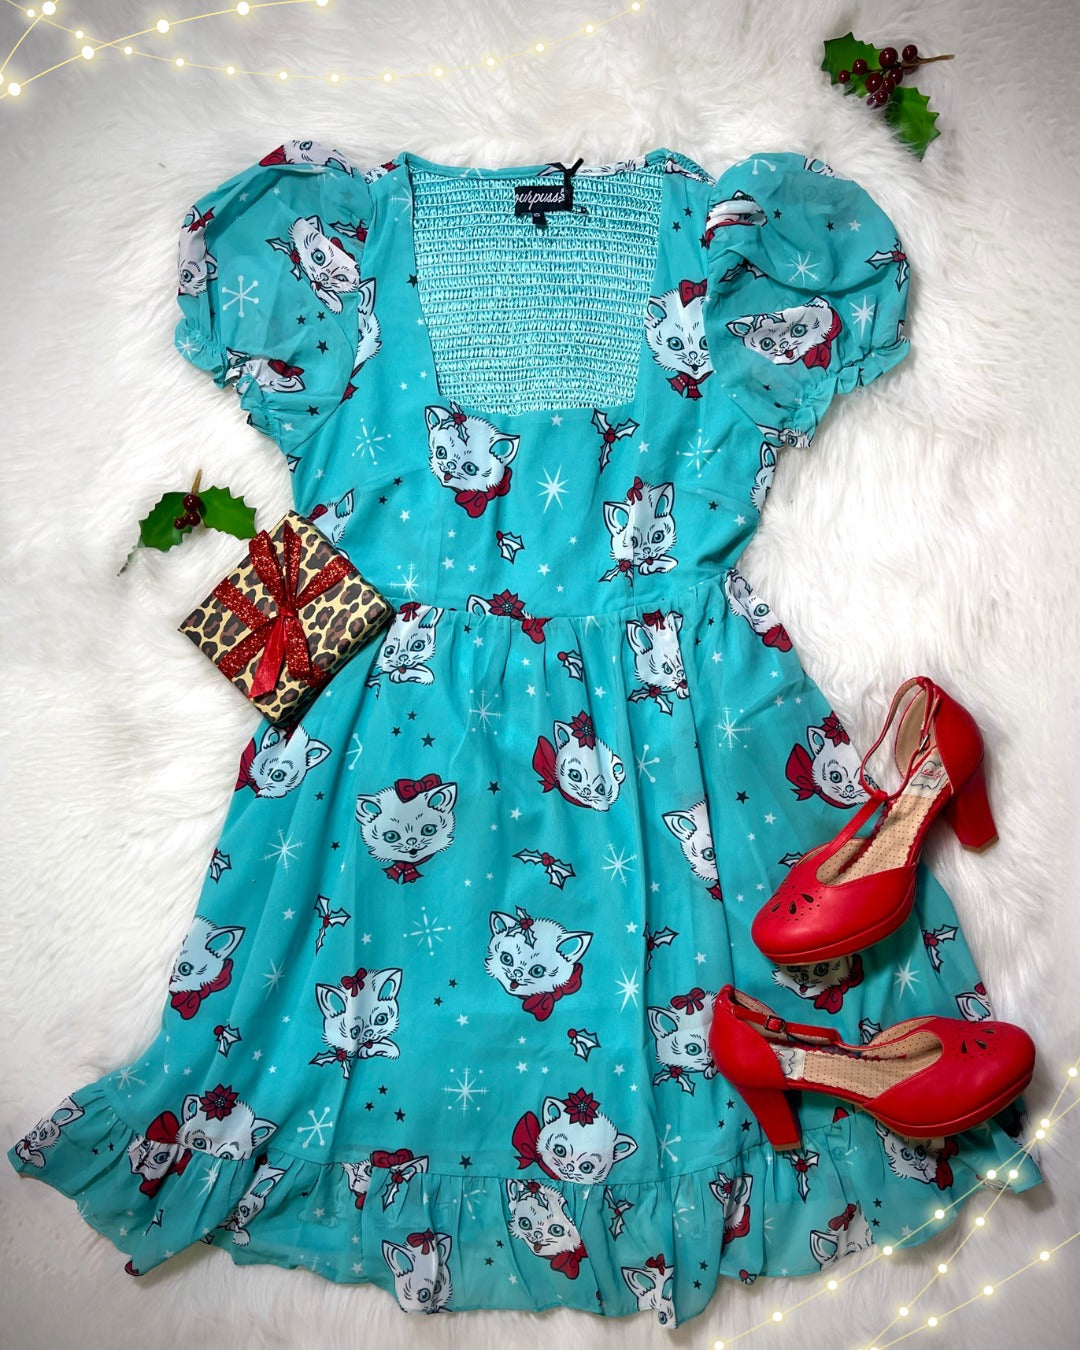 ❤️🎄Purrr-fect Holiday Outfit🎄❤️